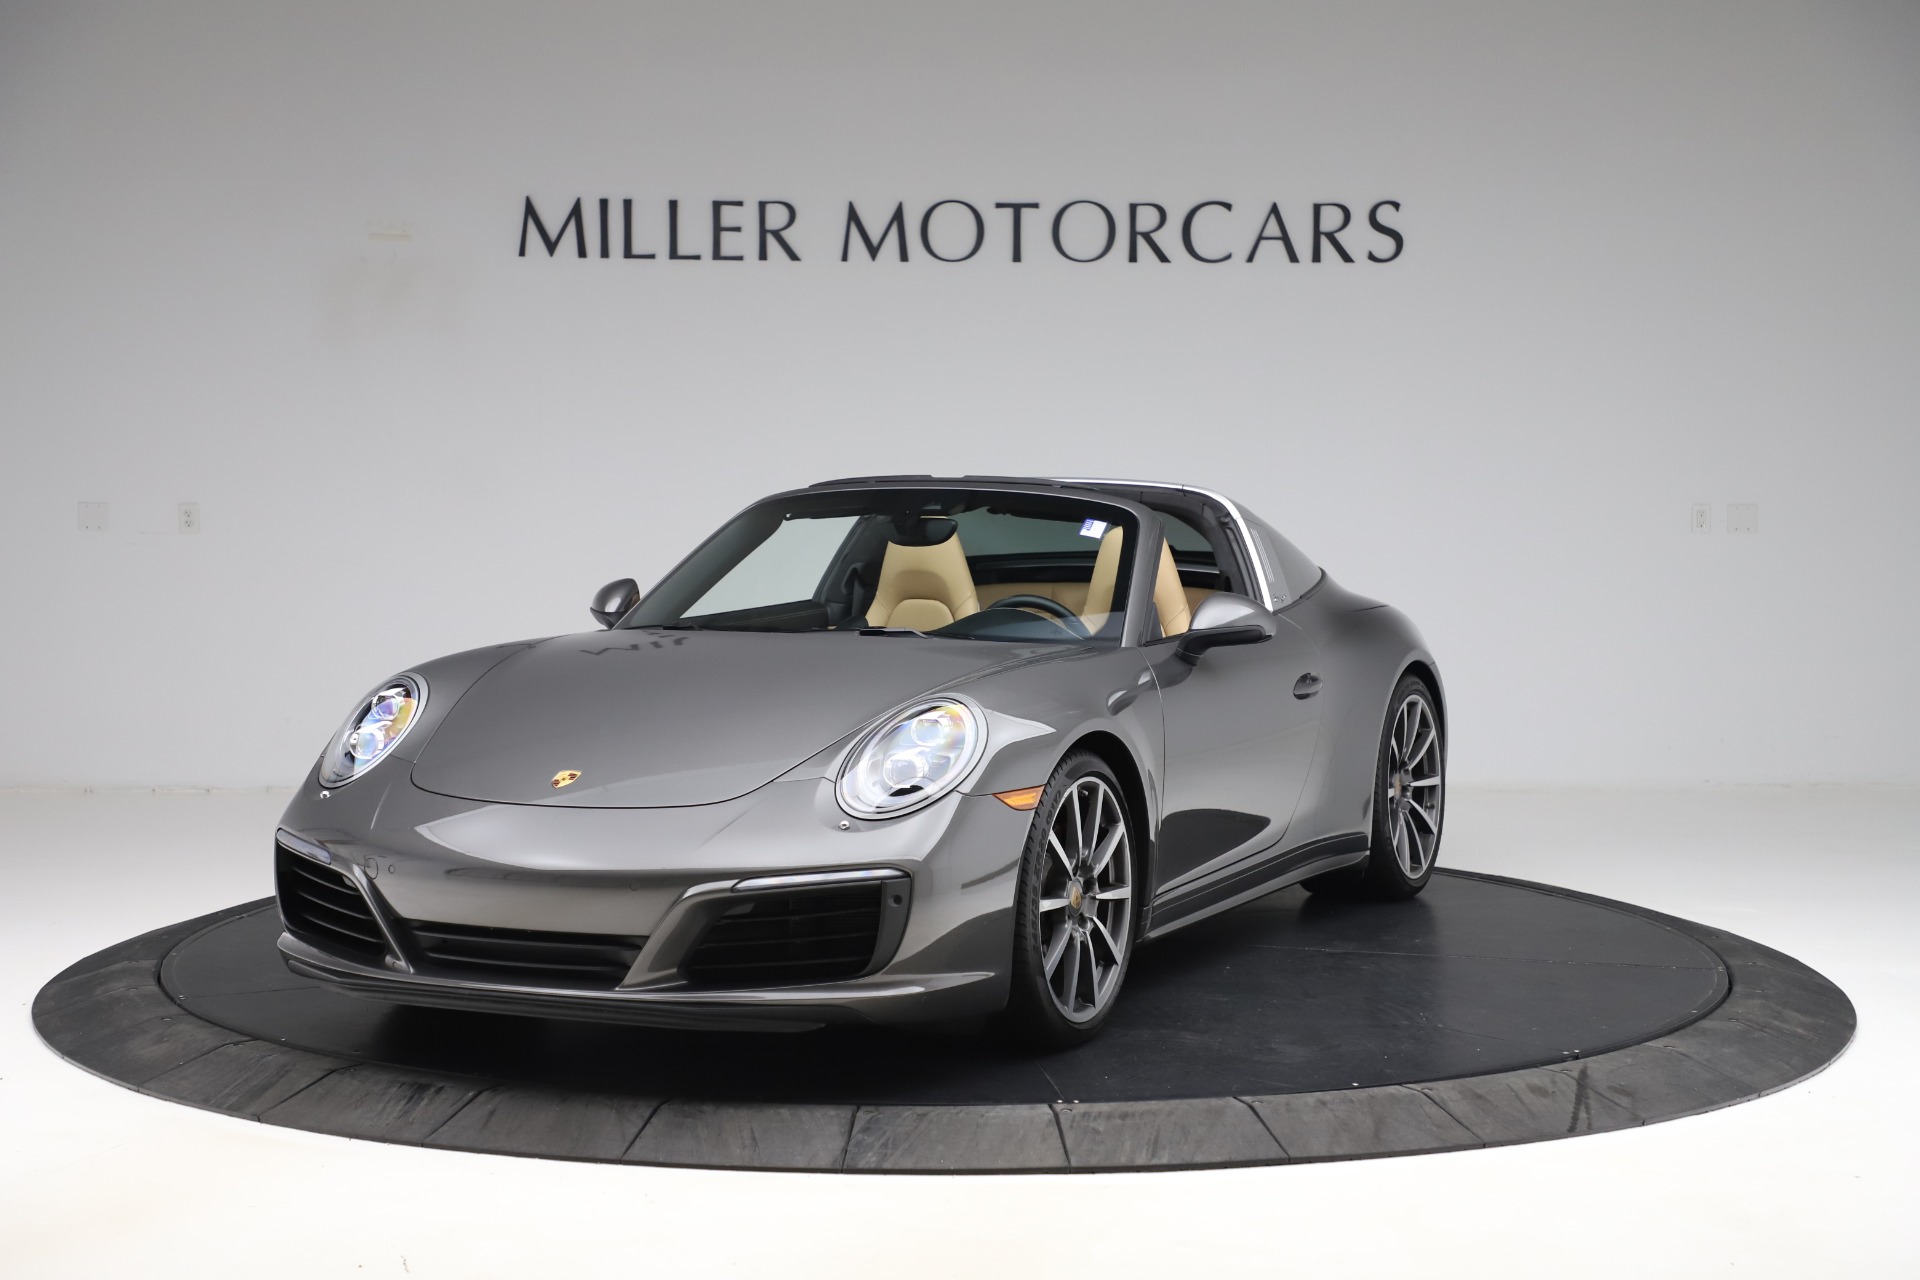 Used 2017 Porsche 911 Targa 4S for sale Sold at Bentley Greenwich in Greenwich CT 06830 1